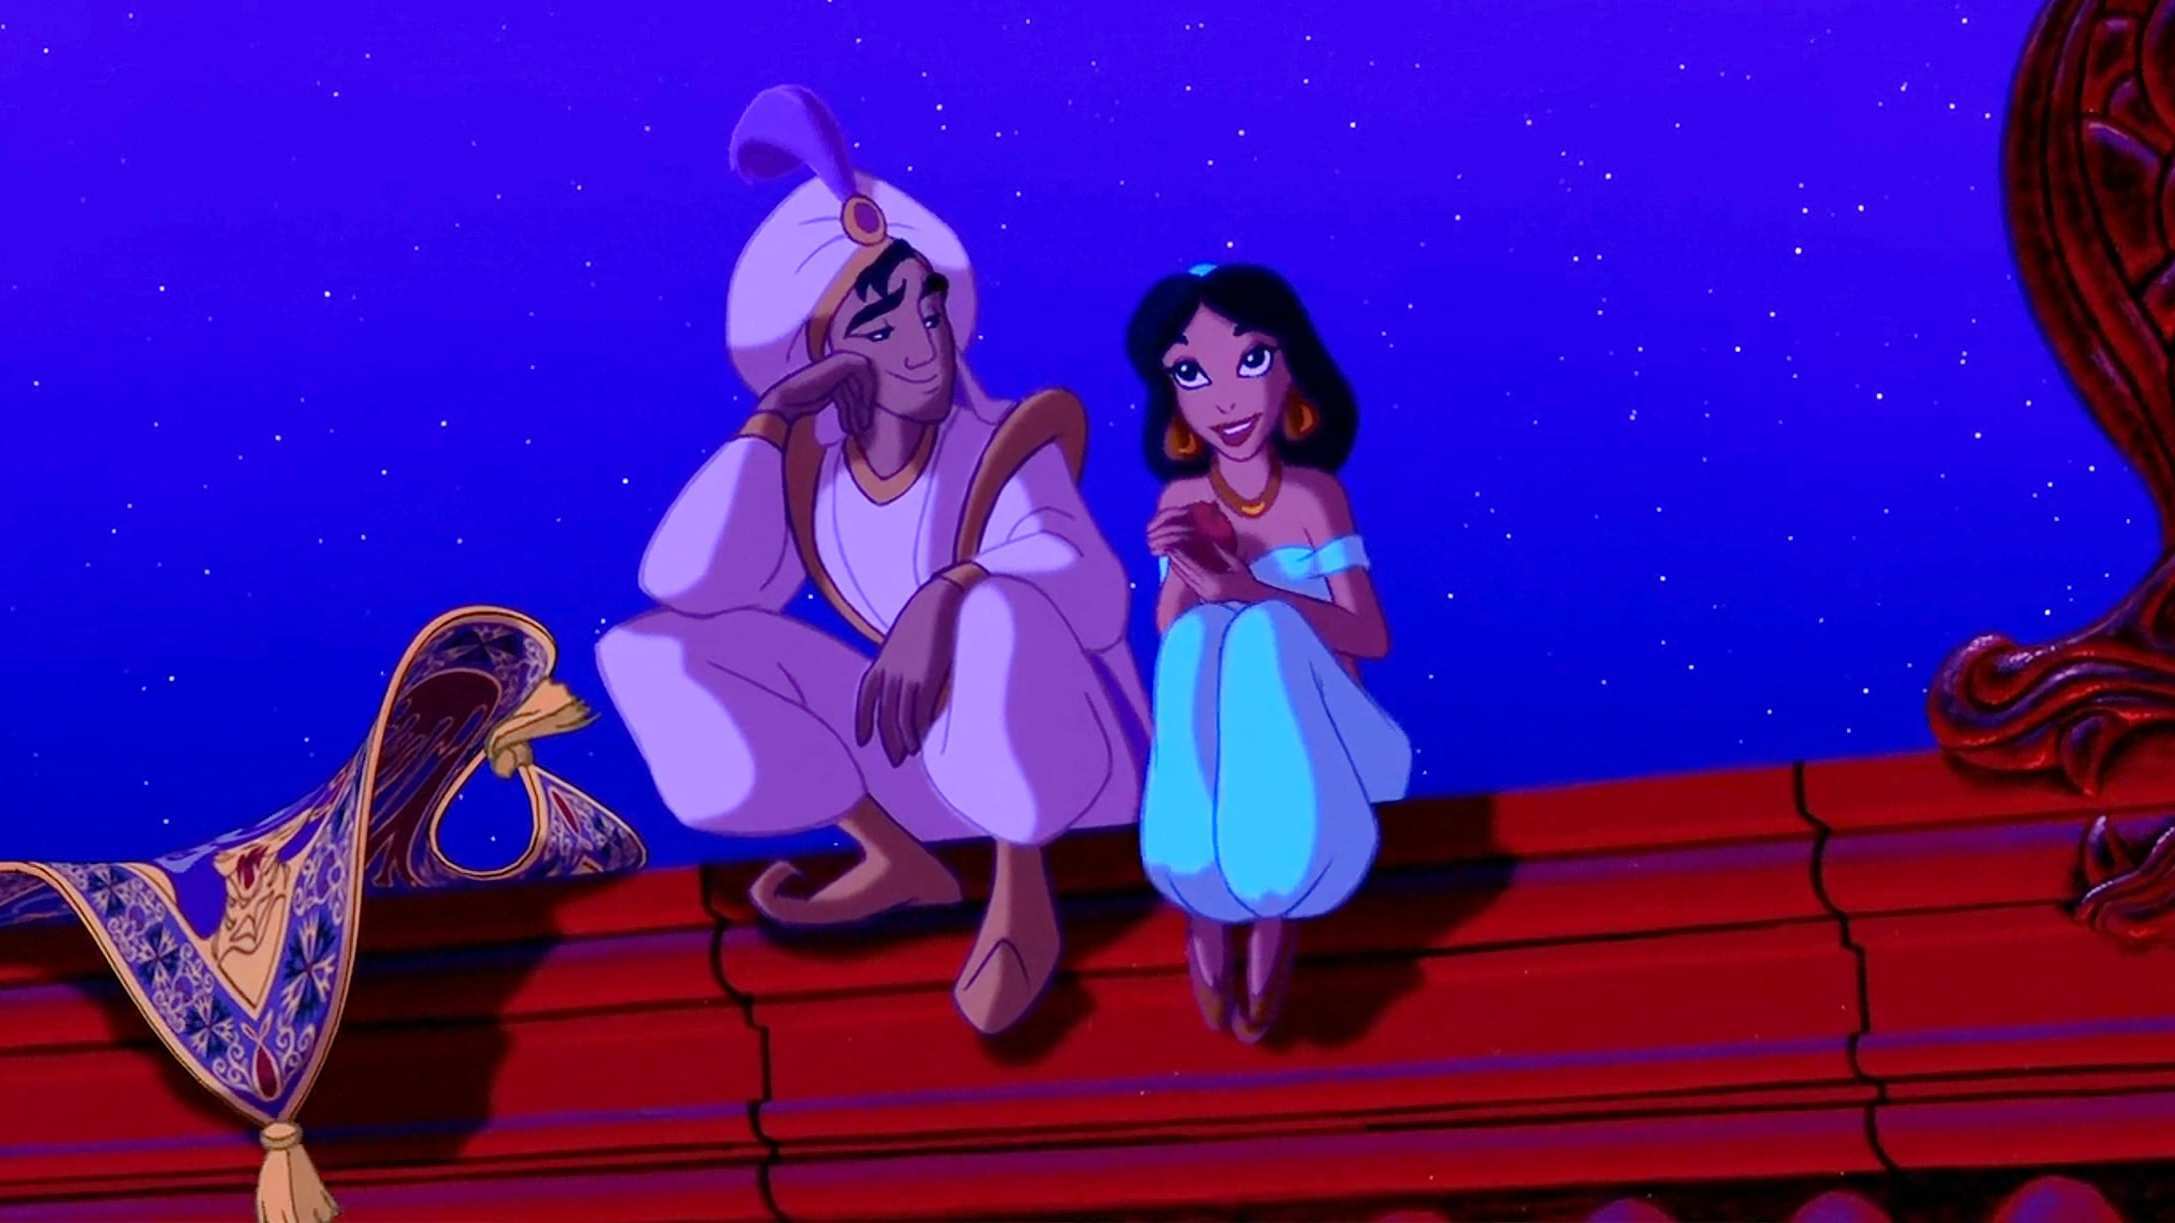  Jasmine and Aladdin taking in the view.